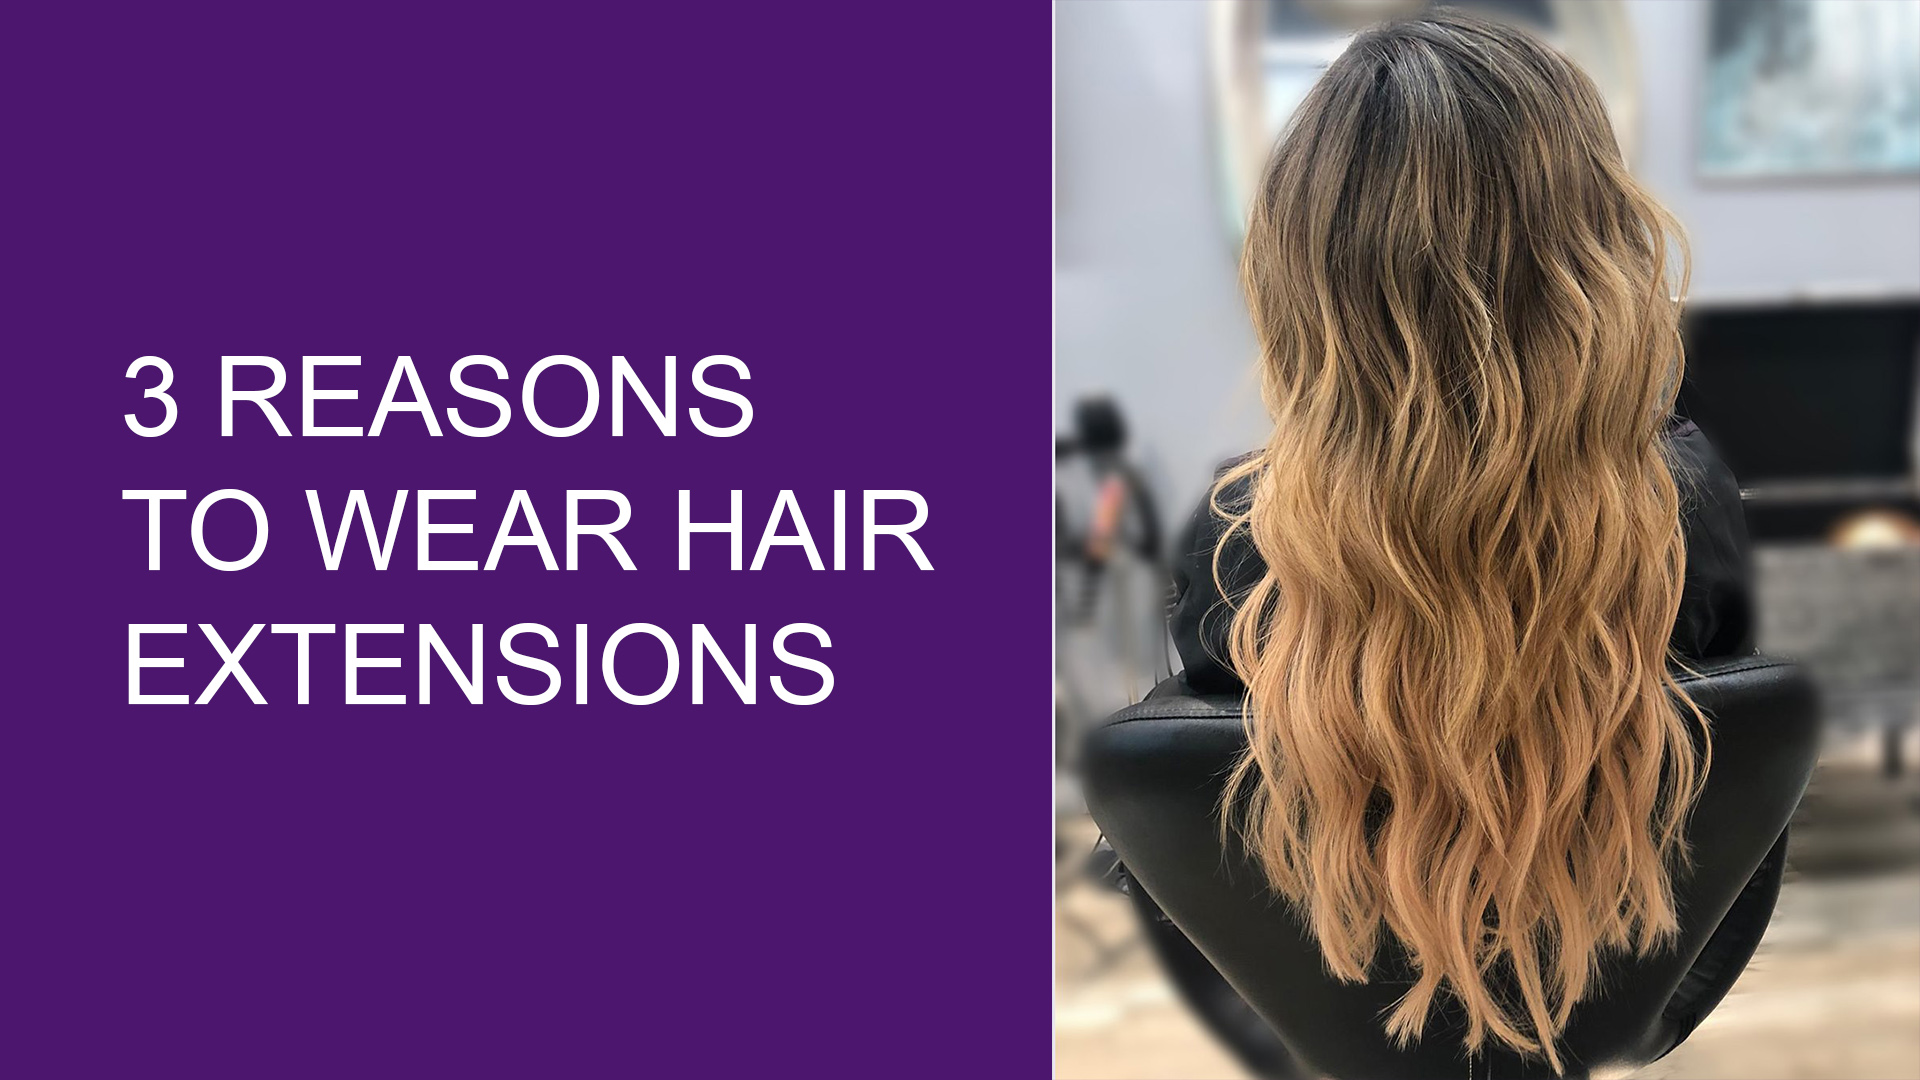 3 REASONS TO WEAR HAIR EXTENSIONS